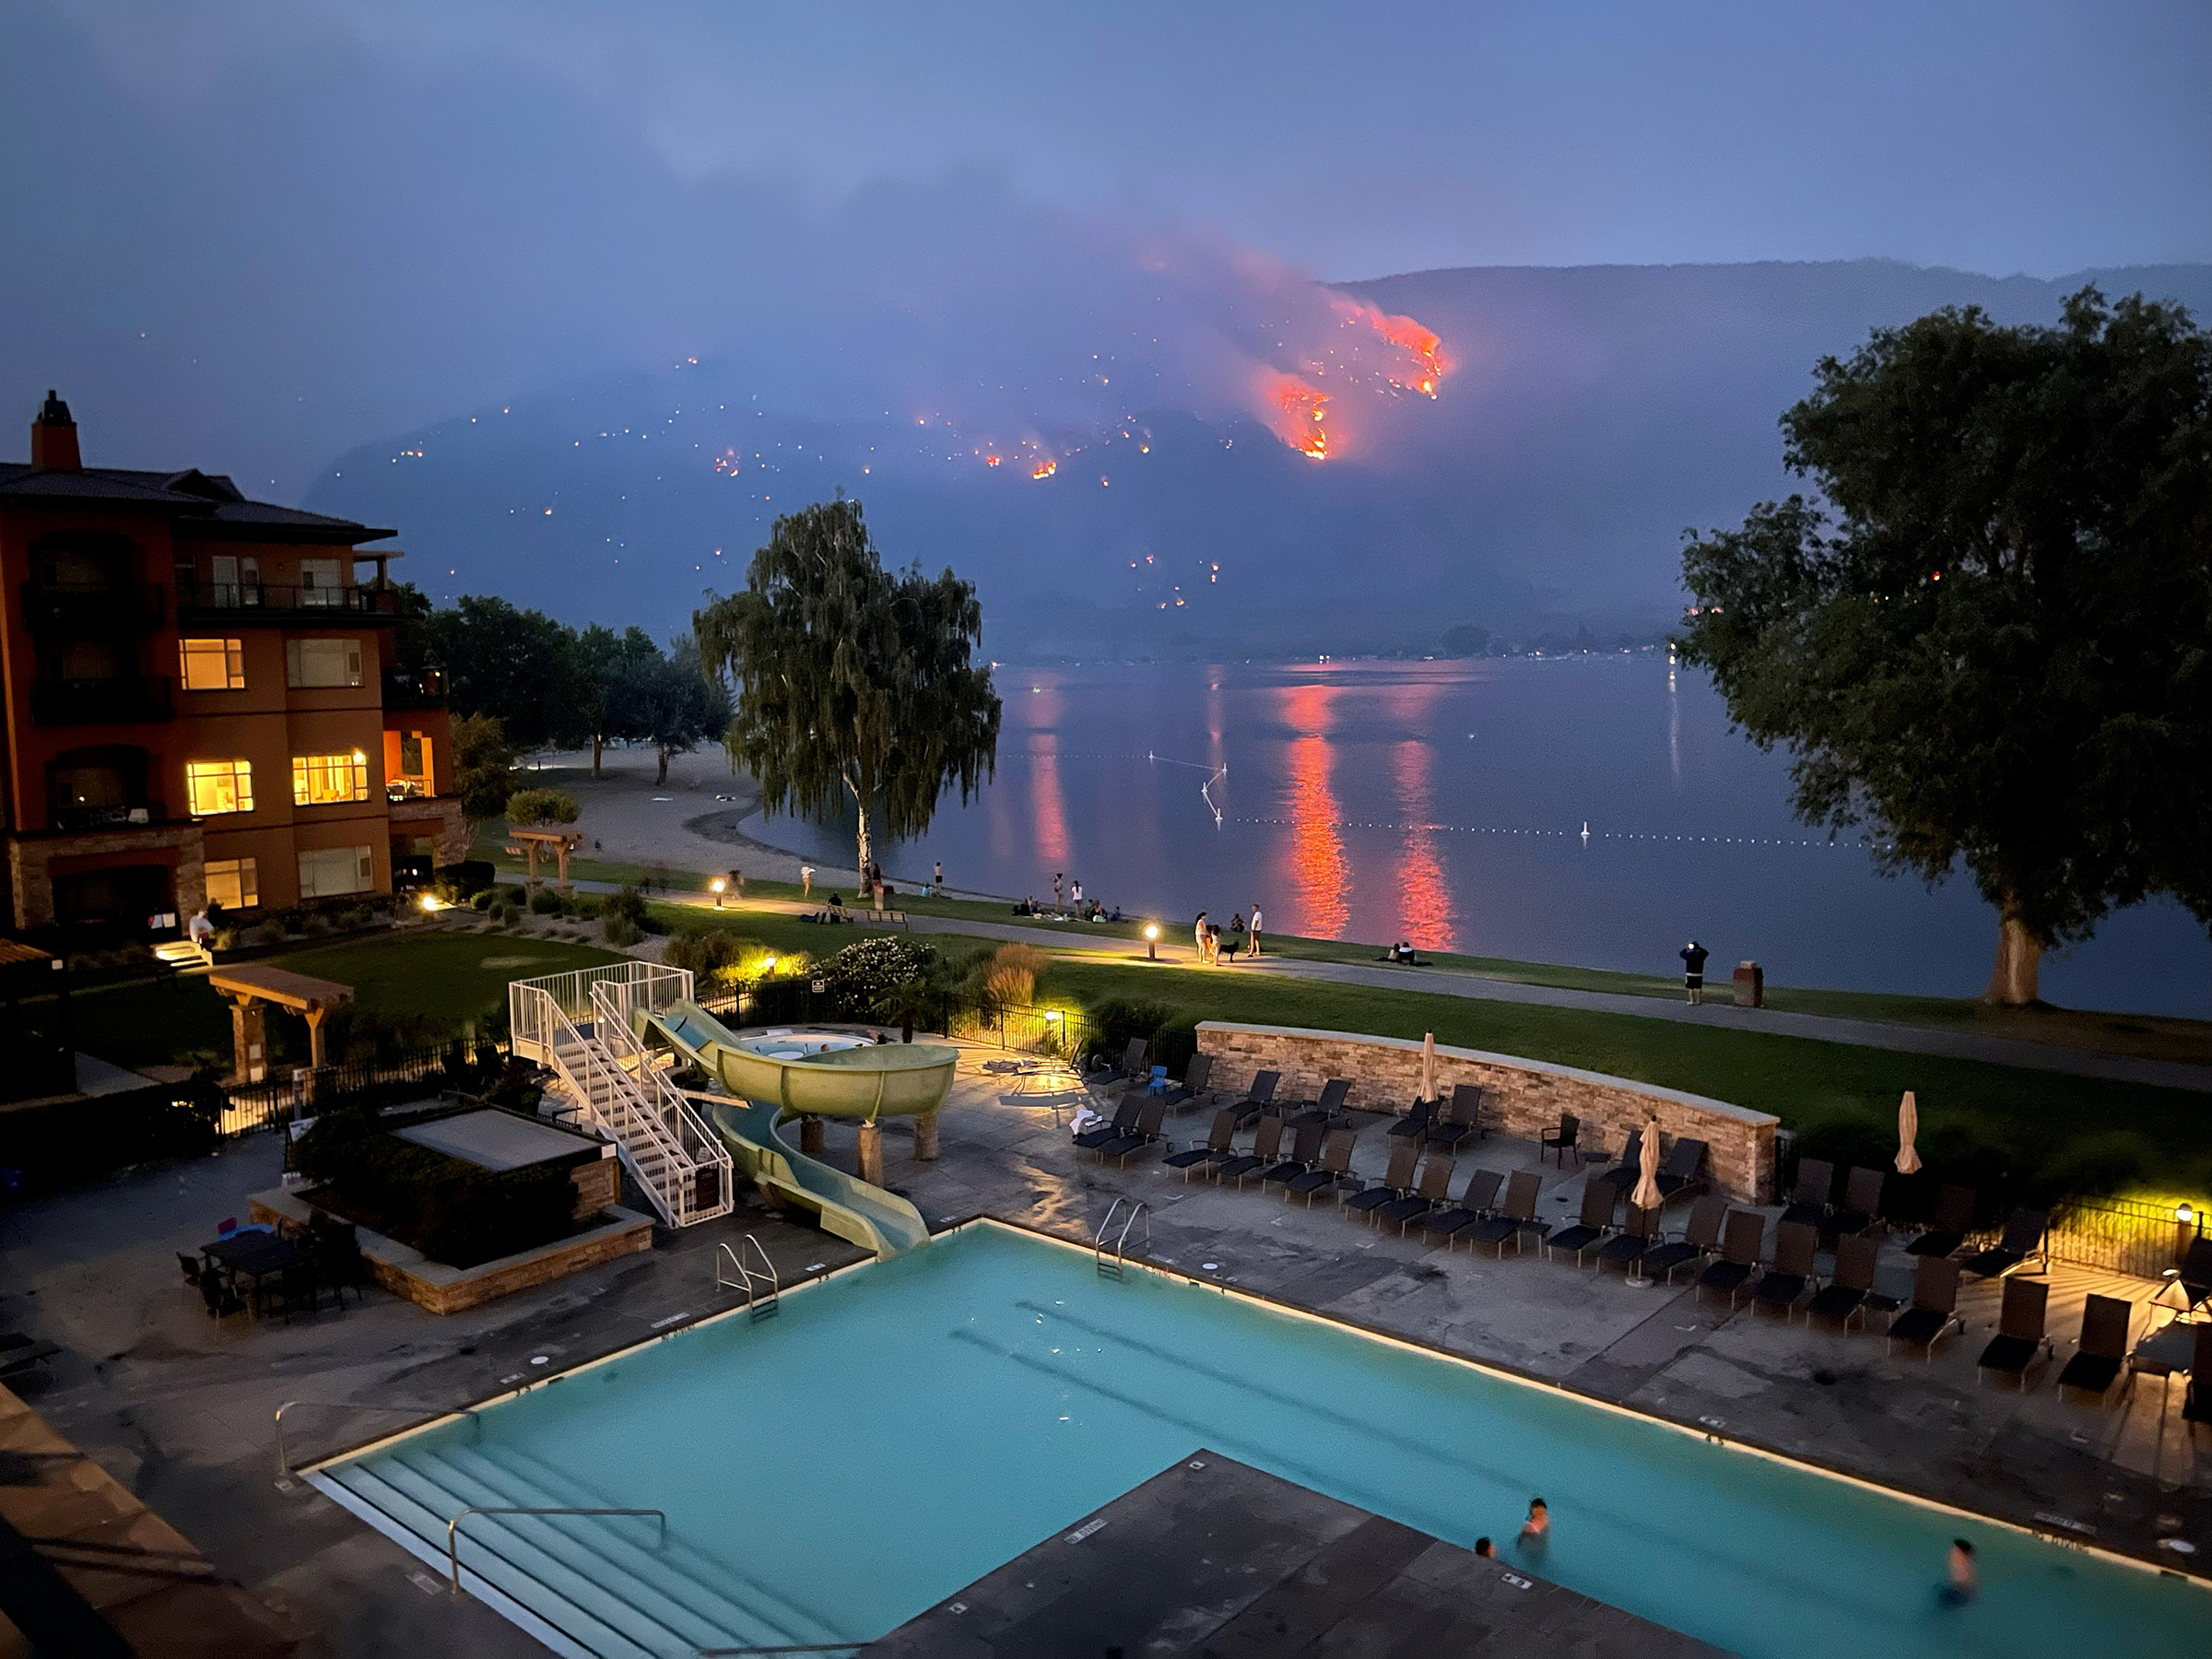 View of a beach resort as a wildfire burns on a hillside in Osoyoos, British Columbia, Canada, on July 20.